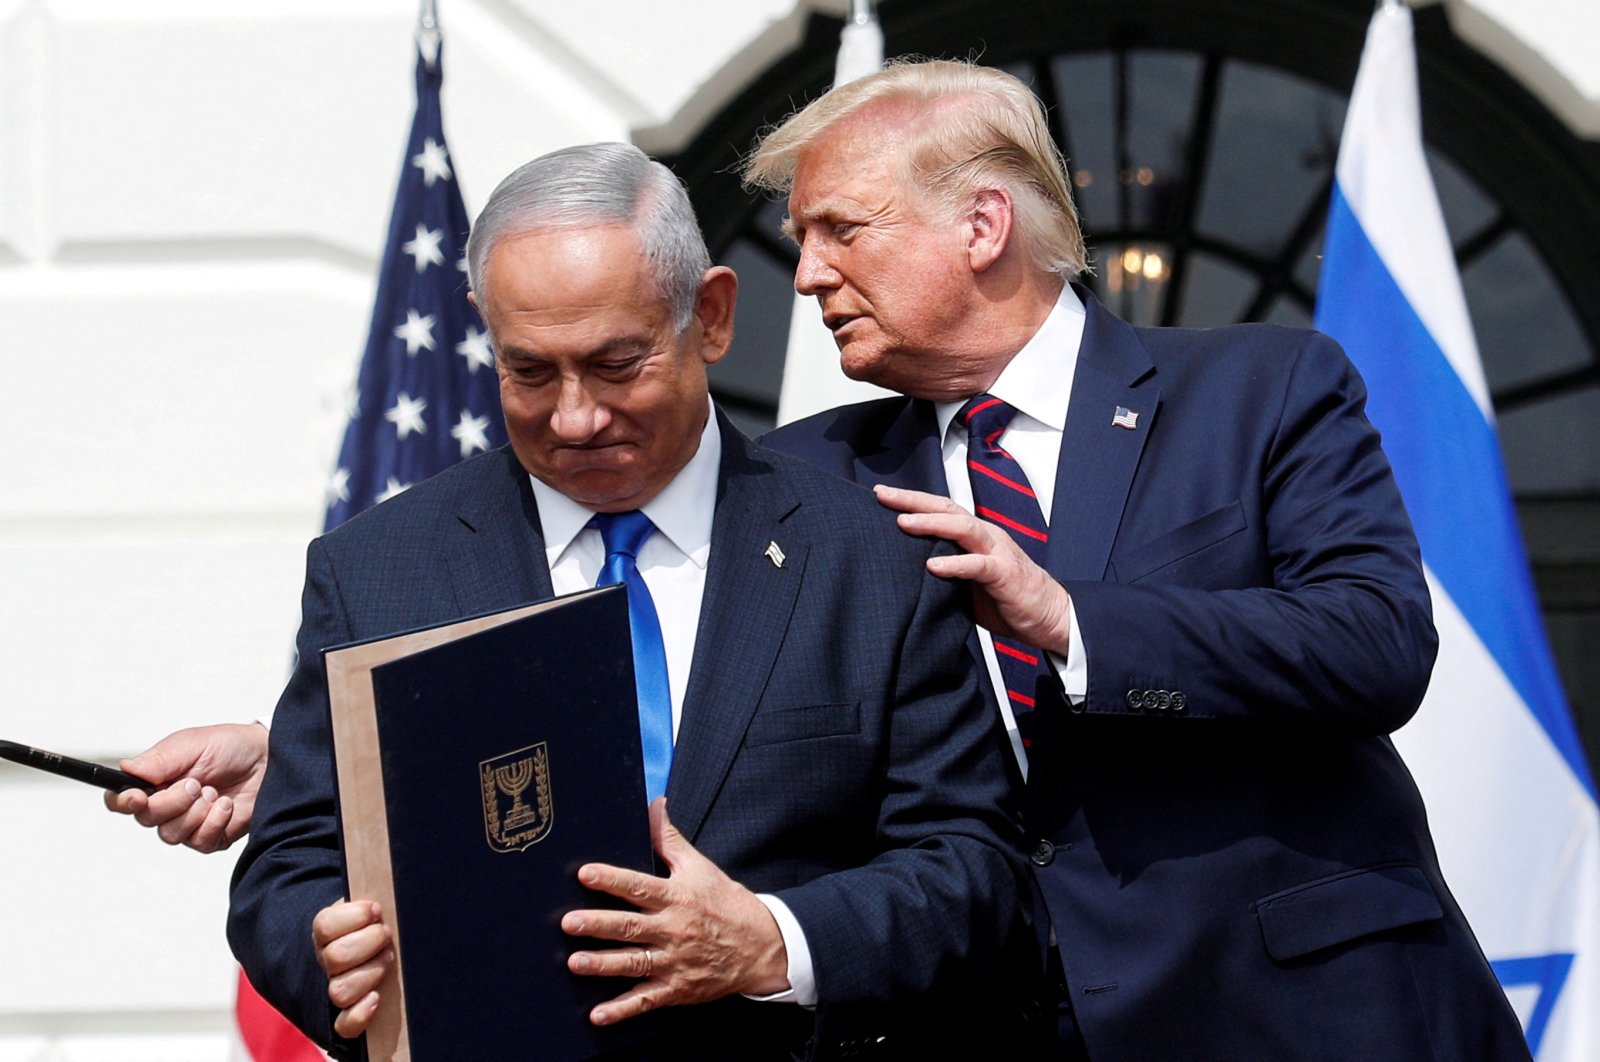 Israel&#039;s Prime Minister Benjamin Netanyahu stands with U.S. President Donald Trump after signing the Abraham Accords, normalizing relations between Israel and some of its Middle East neighbors, on the South Lawn of the White House in Washington, U.S., Sept. 15, 2020. (Reuters Photo)